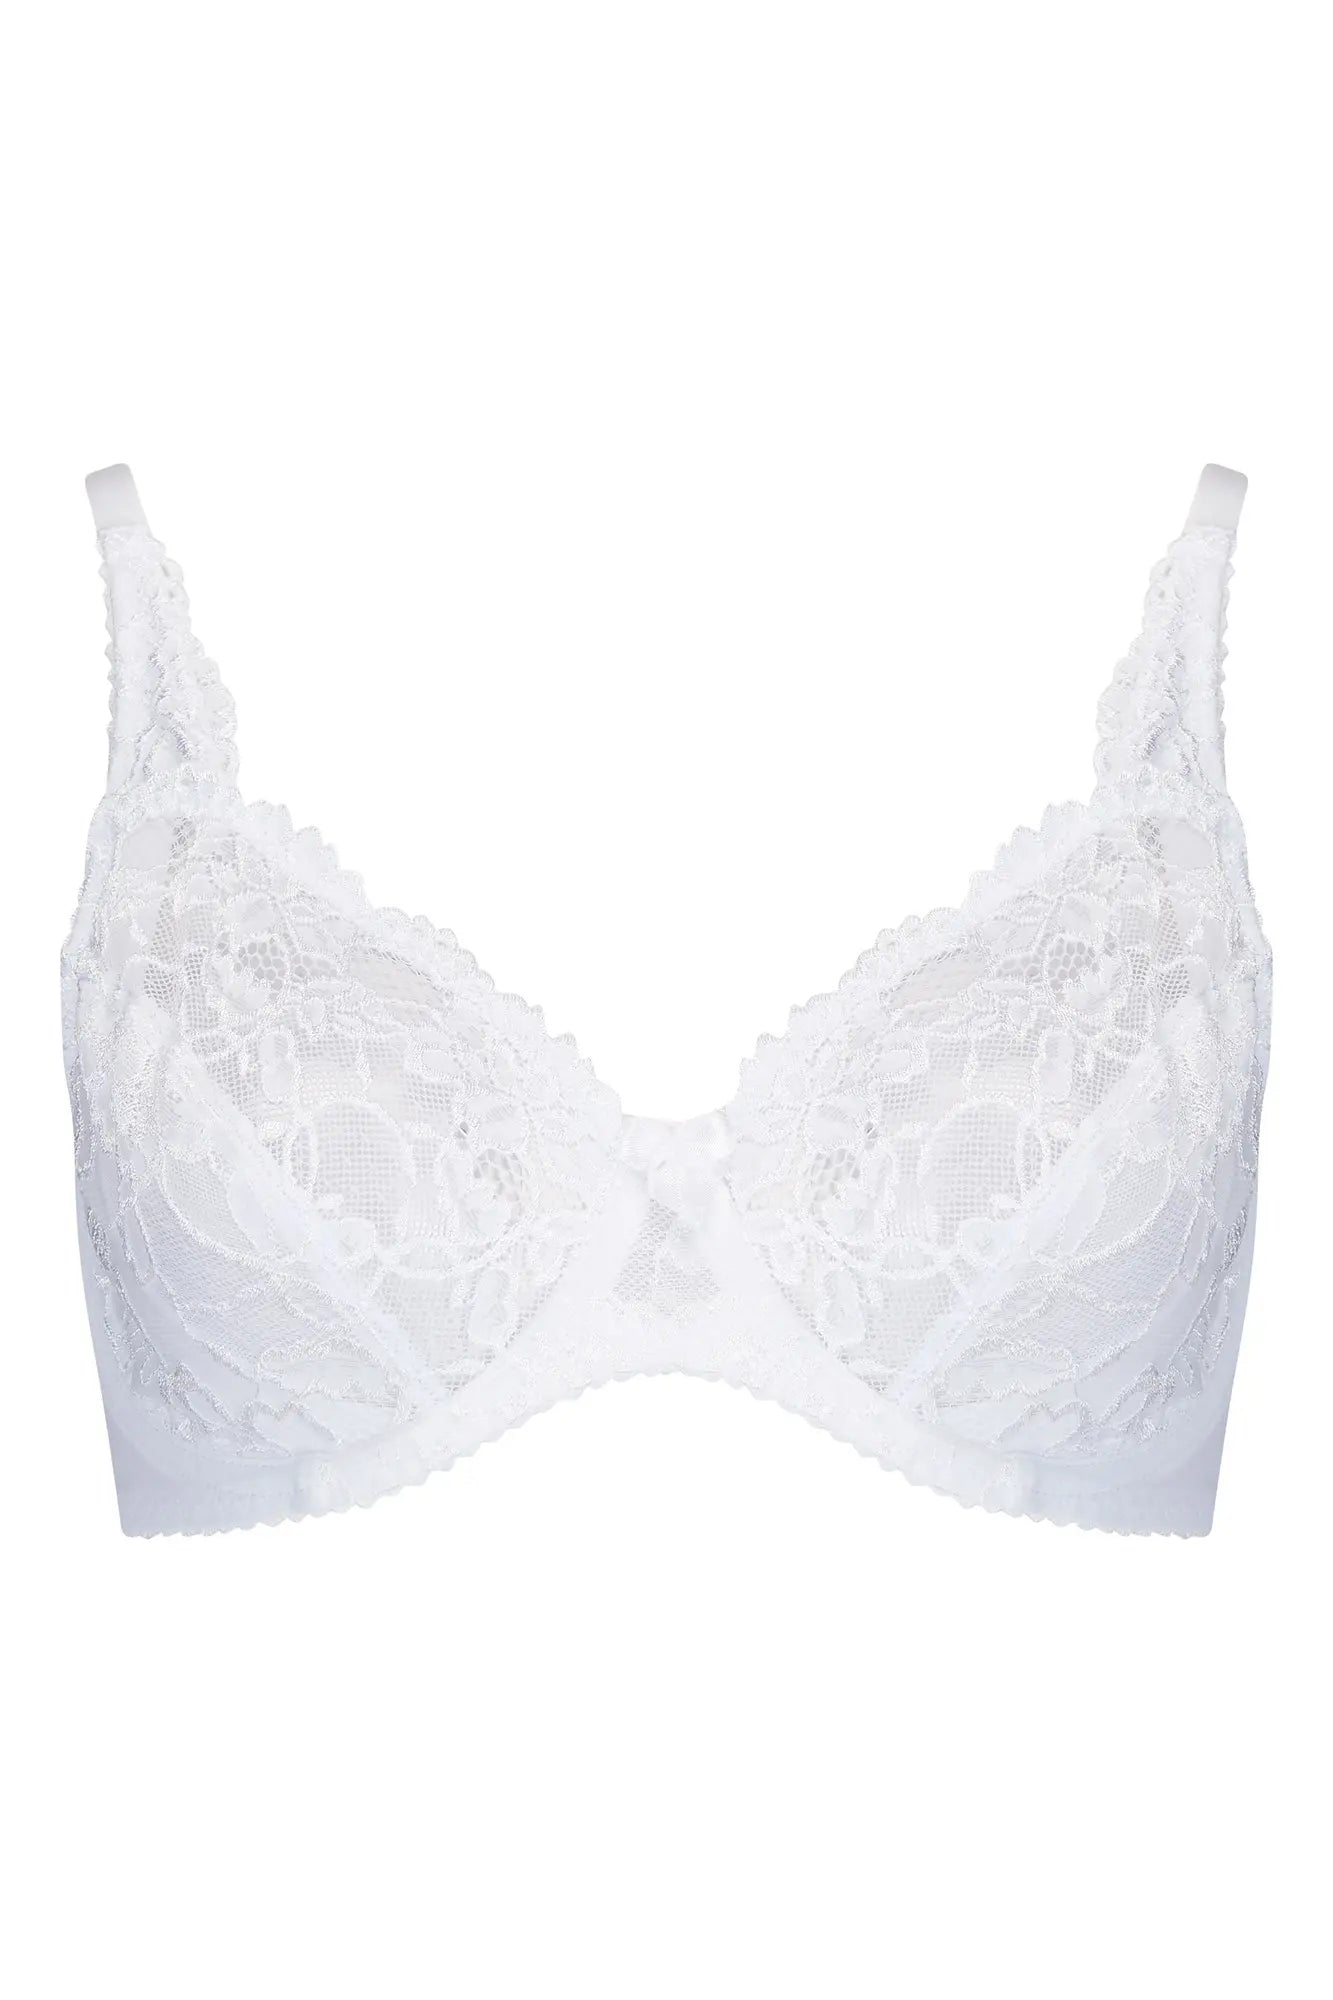 CHARNOS ROSALIND FULL Cup Bra 116501 Underwired Womens Lace Bras $17.72 -  PicClick